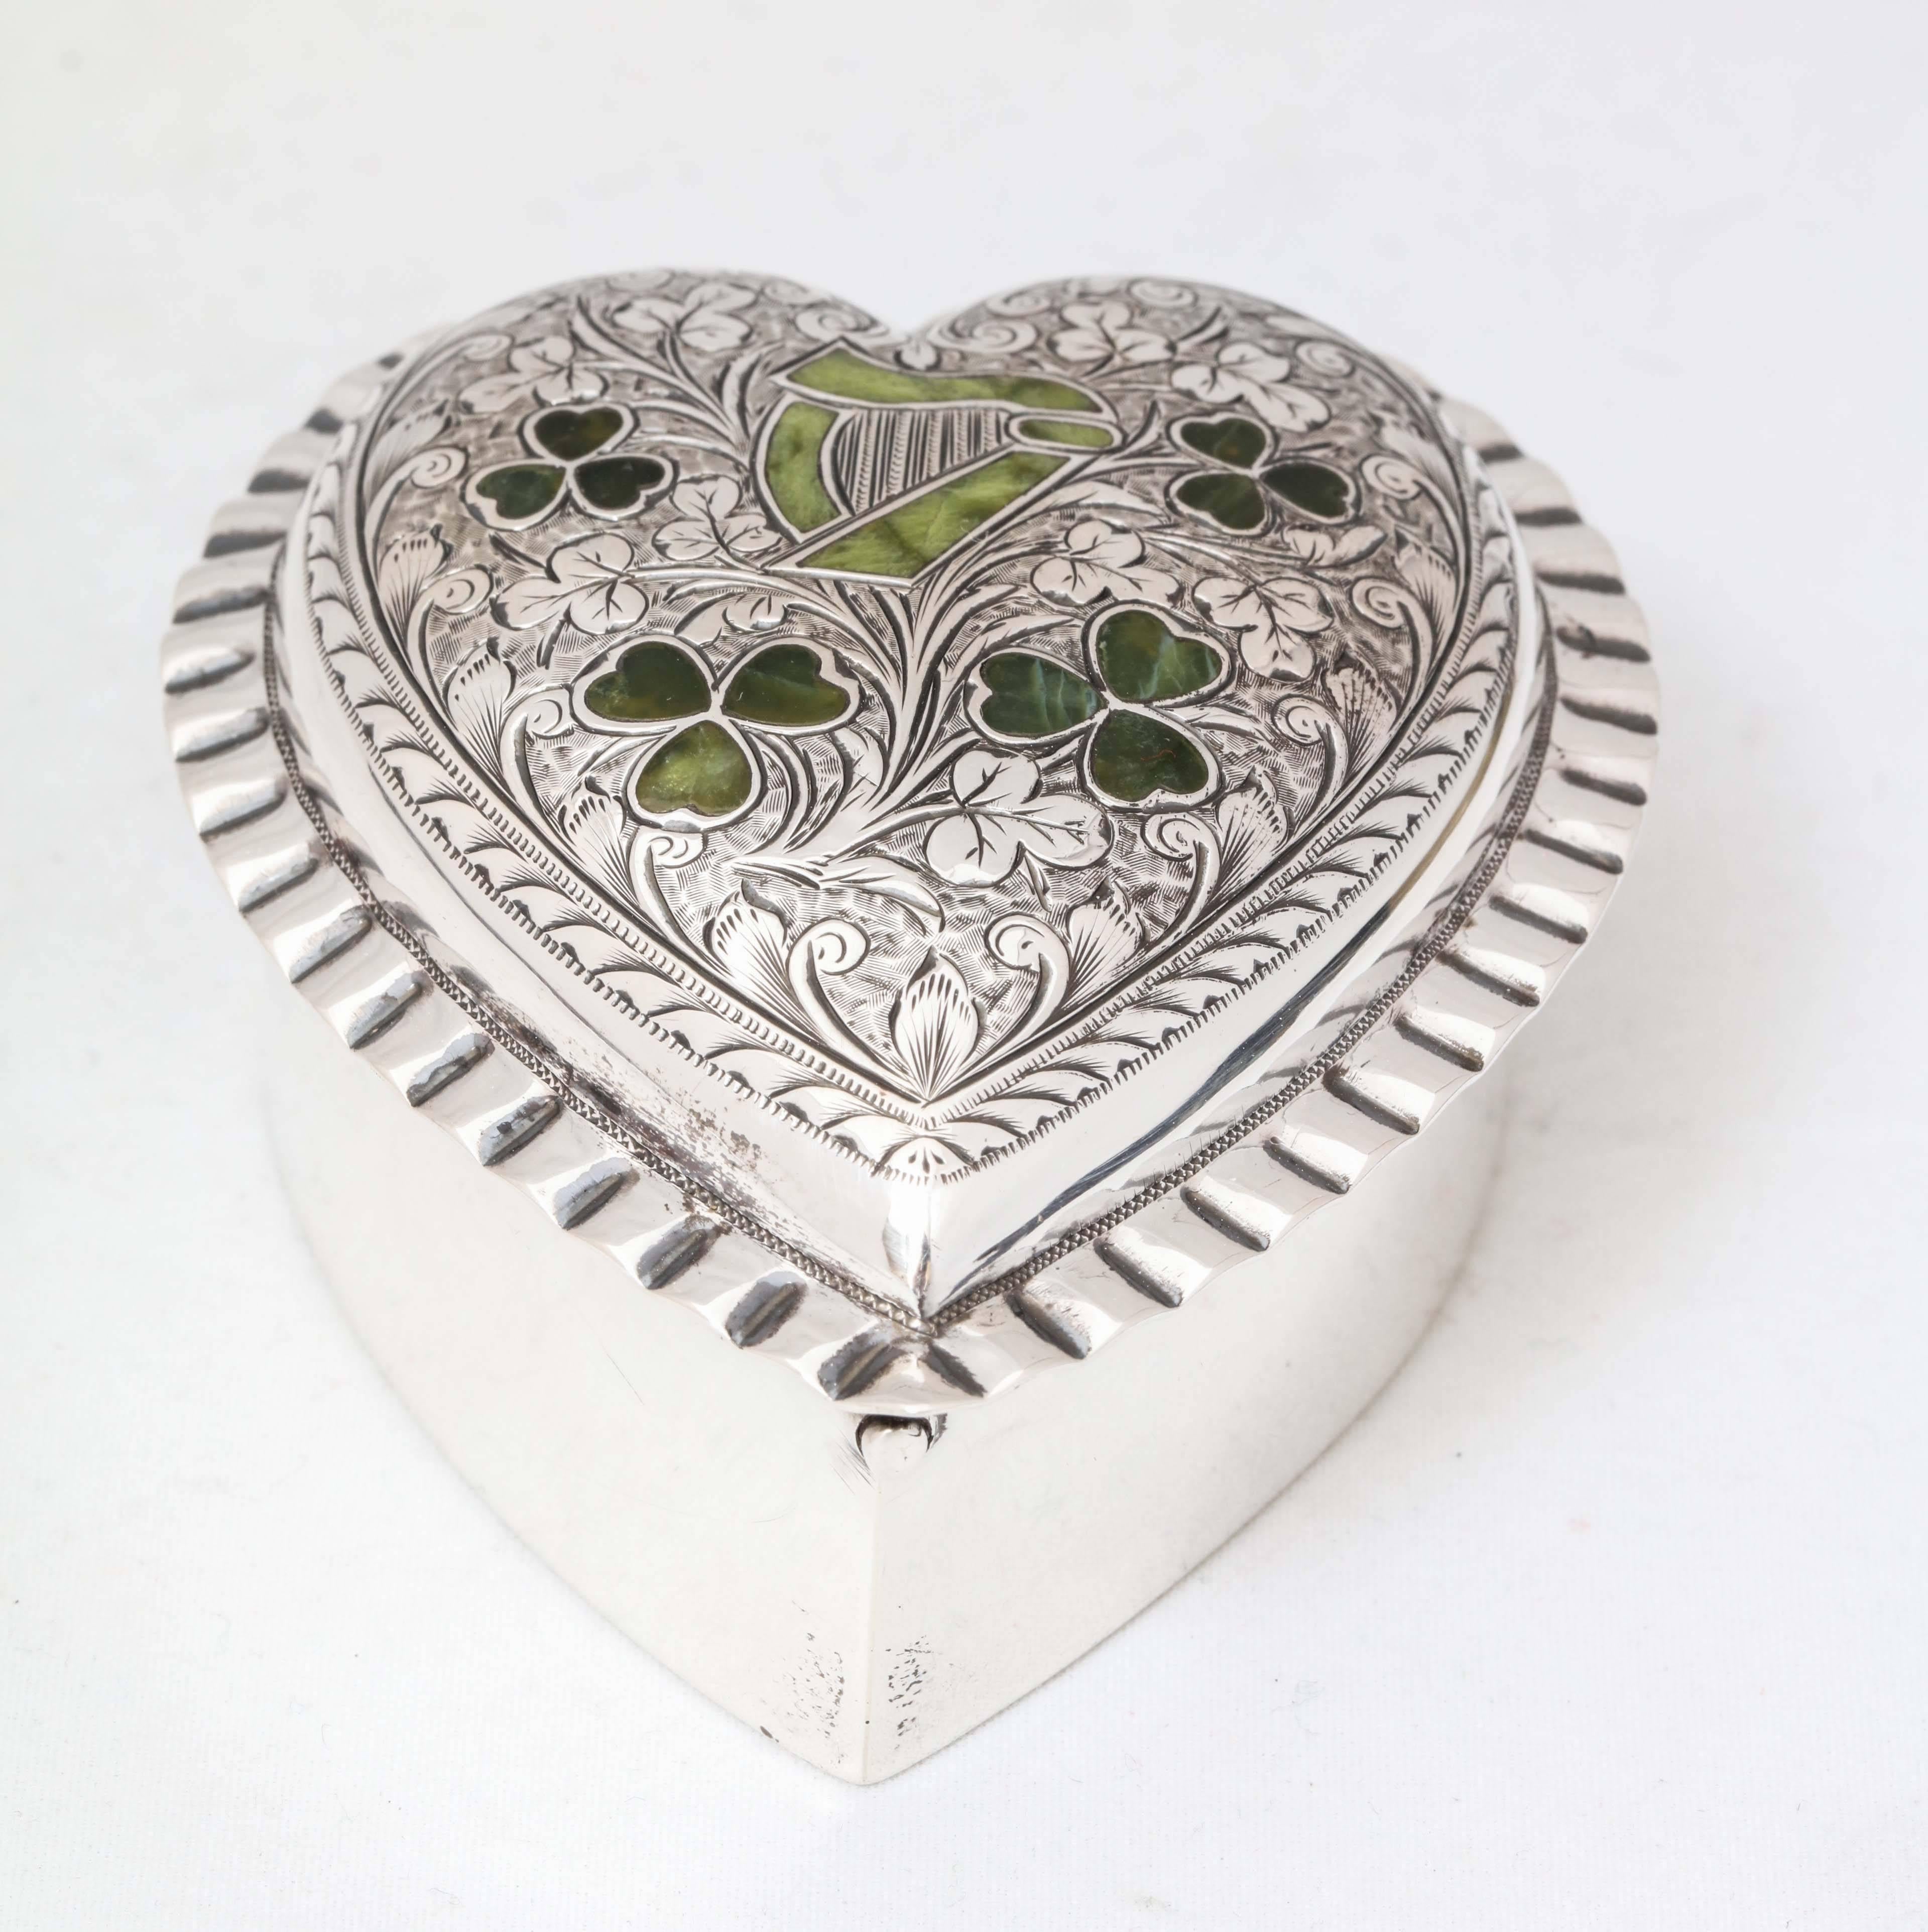 Edwardian, rare, sterling silver and agate heart form box with hinged lid, made for the Irish market, Birmingham, England, 1901, J. Cook & Son makers. Lid is decorated with dark green agate Irish clovers and a lighter green agate Irish harp.